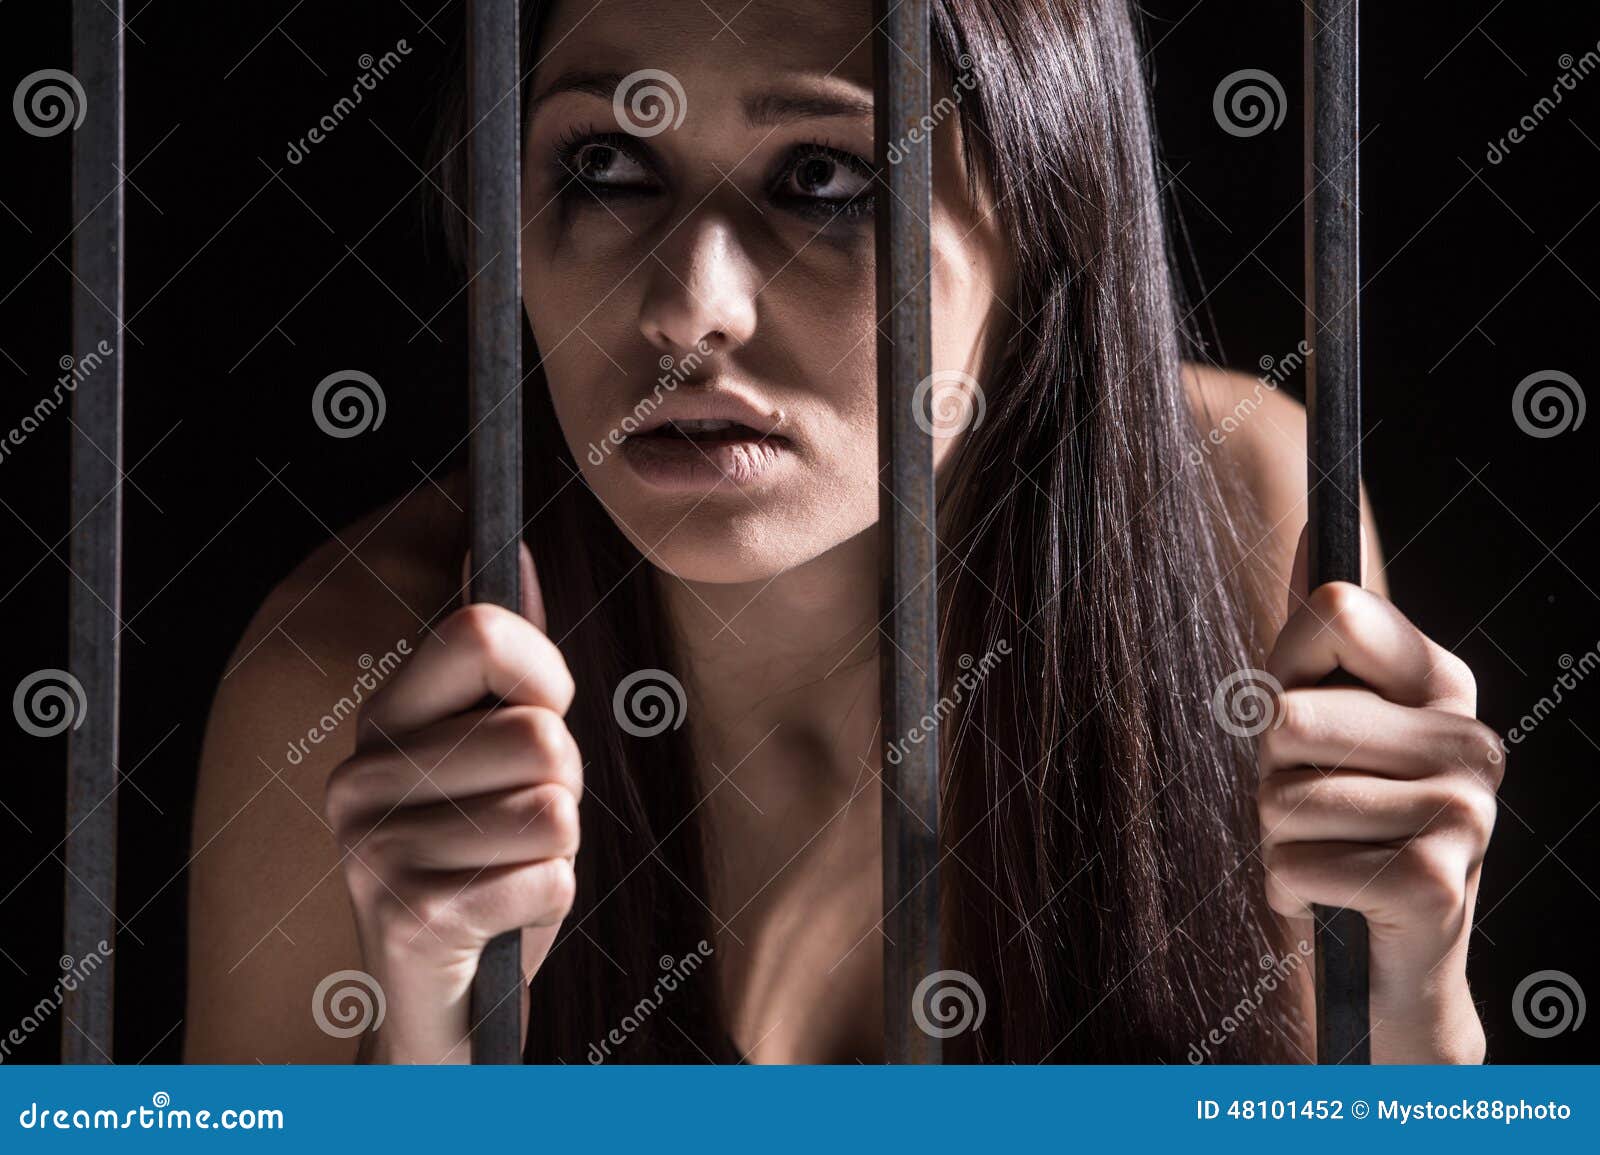 young woman looking from behind bars.